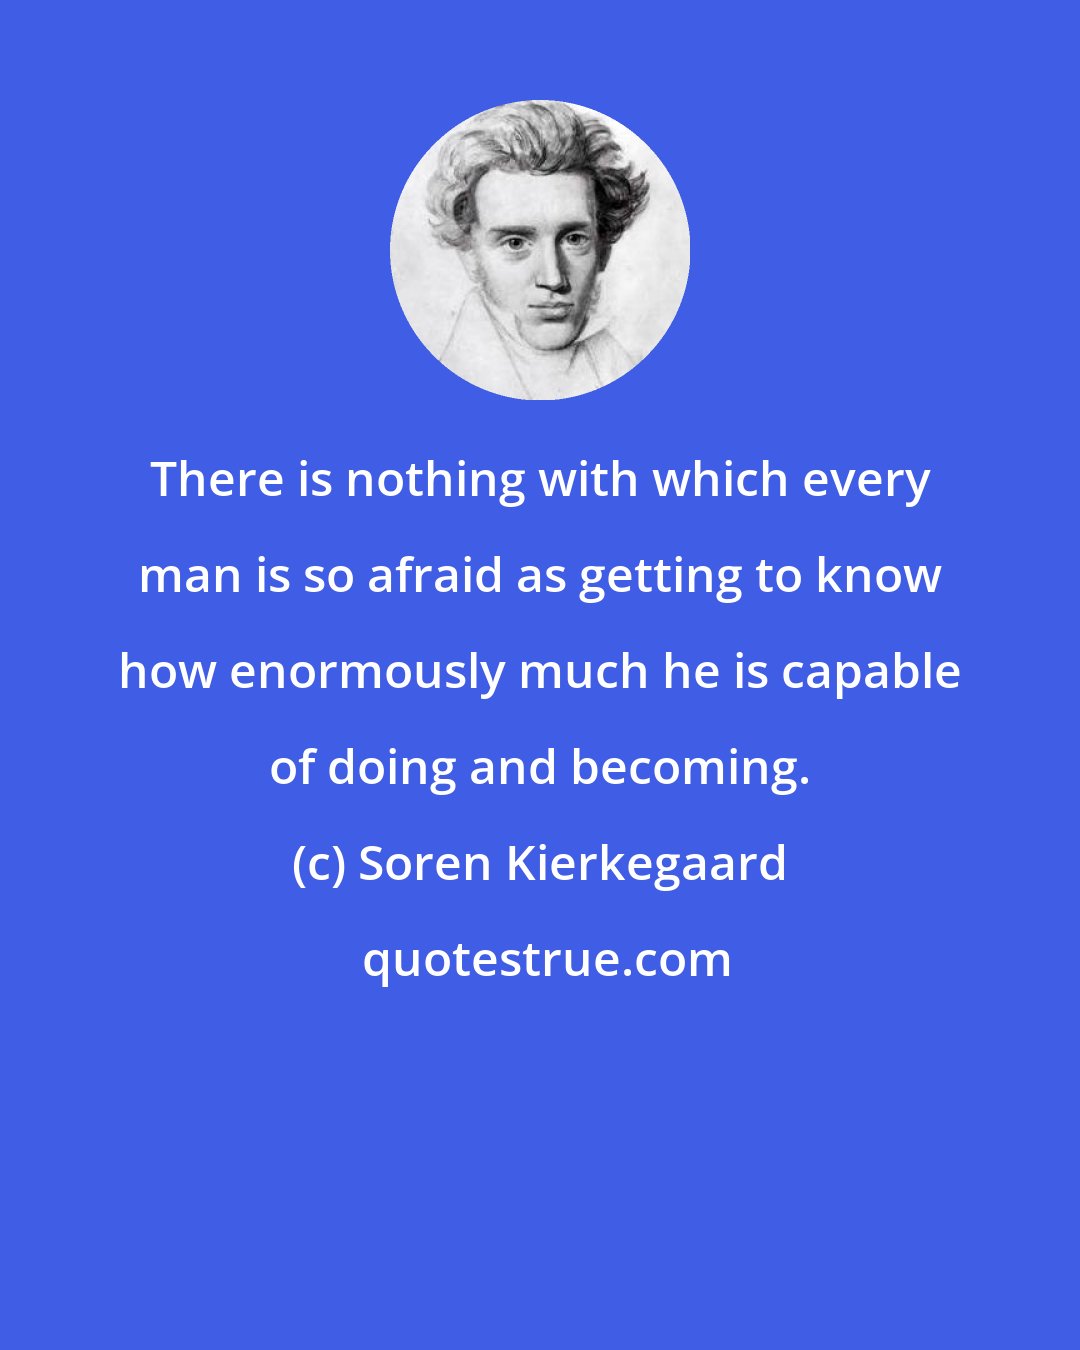 Soren Kierkegaard: There is nothing with which every man is so afraid as getting to know how enormously much he is capable of doing and becoming.